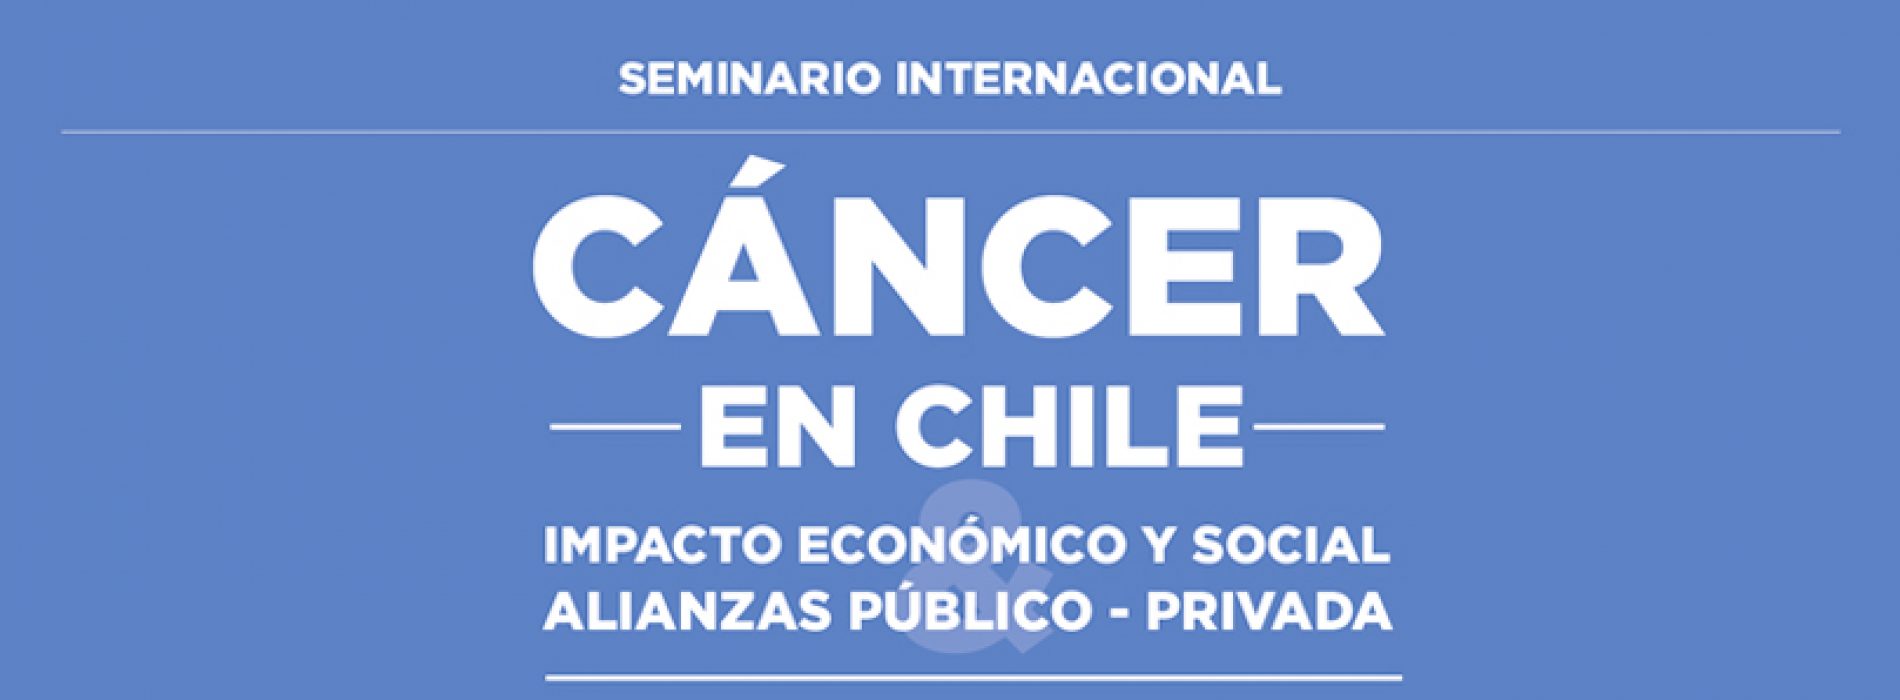 Cancer in Chile 2018 seminar: economic and social impact & public-private partnerships